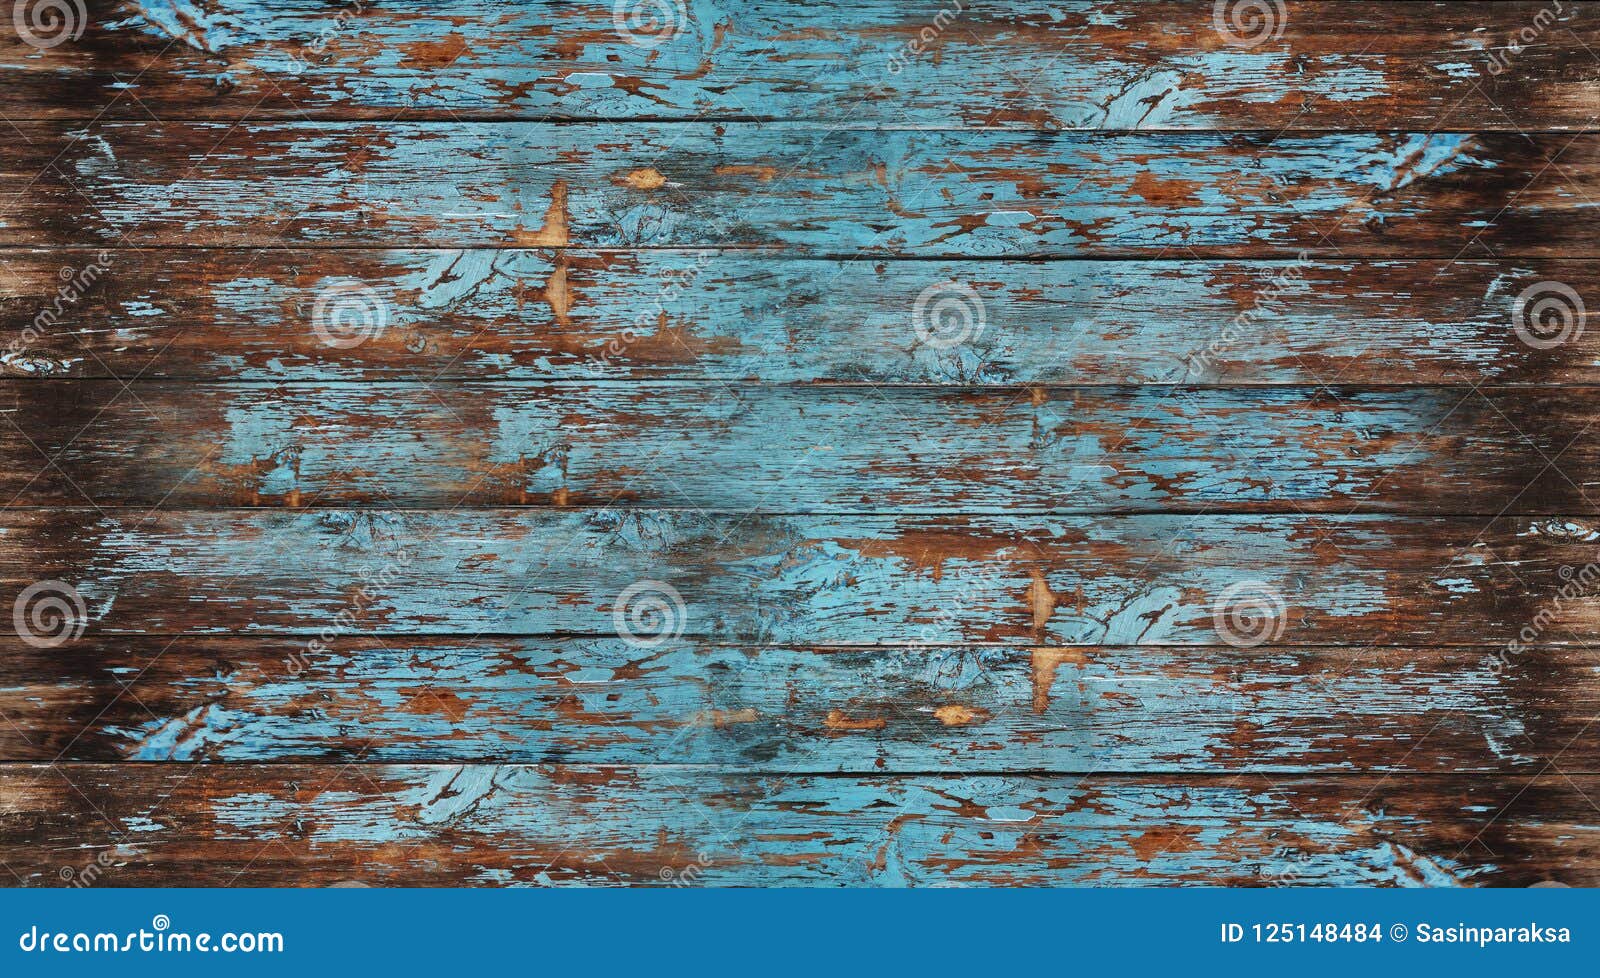 old wood texture, peeling painted blue wood for background